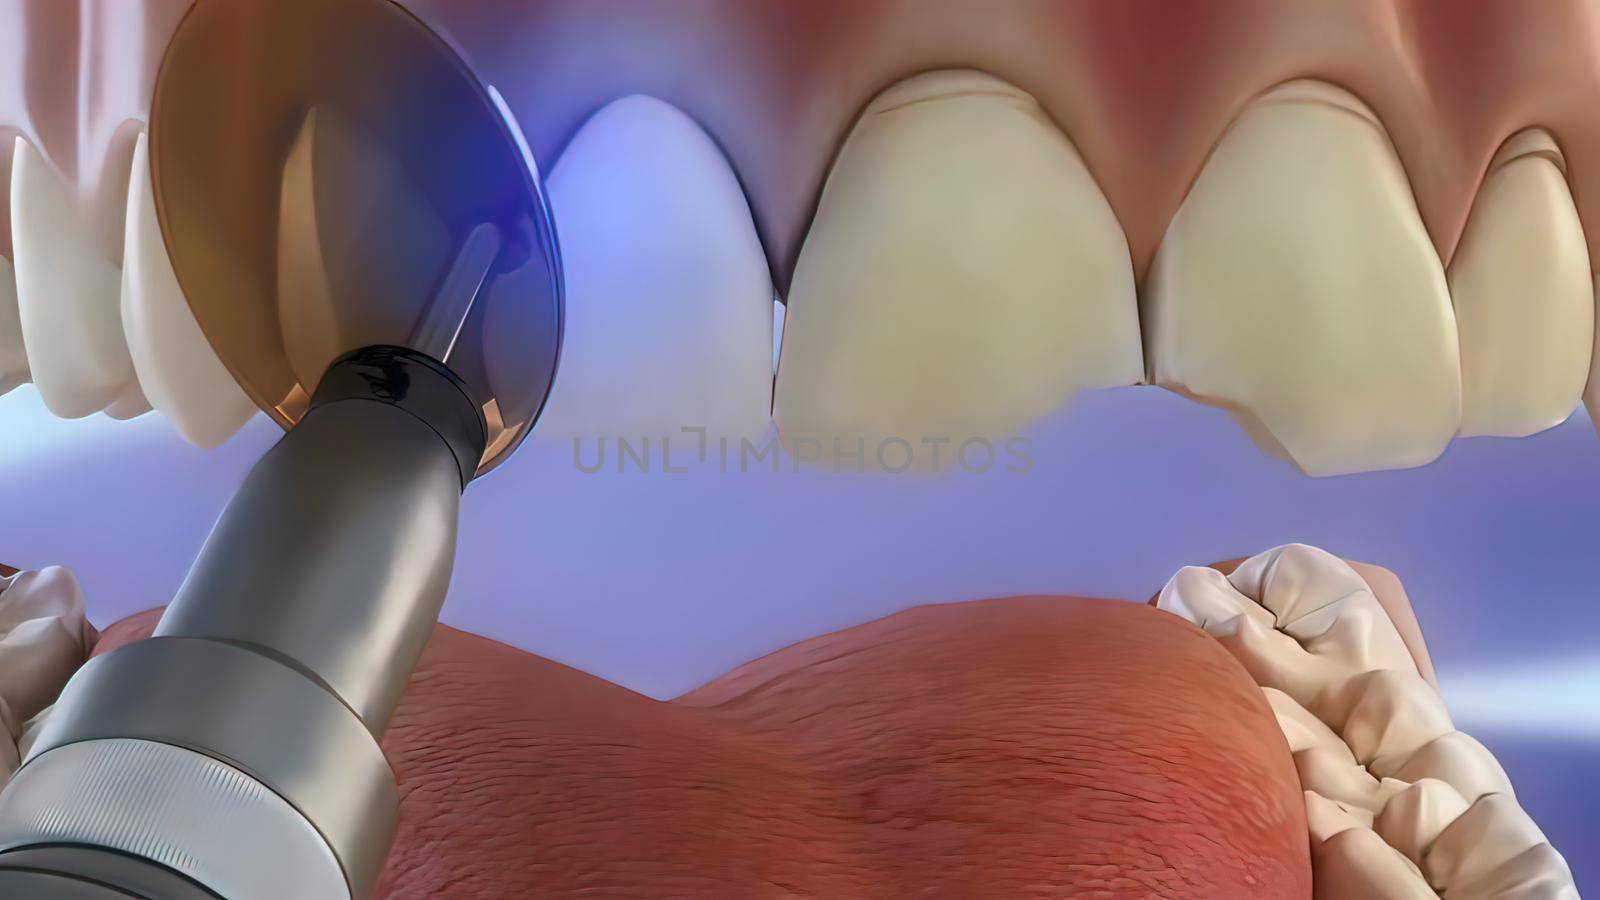 Tooth coating process, drying with adhesive beam by creativepic